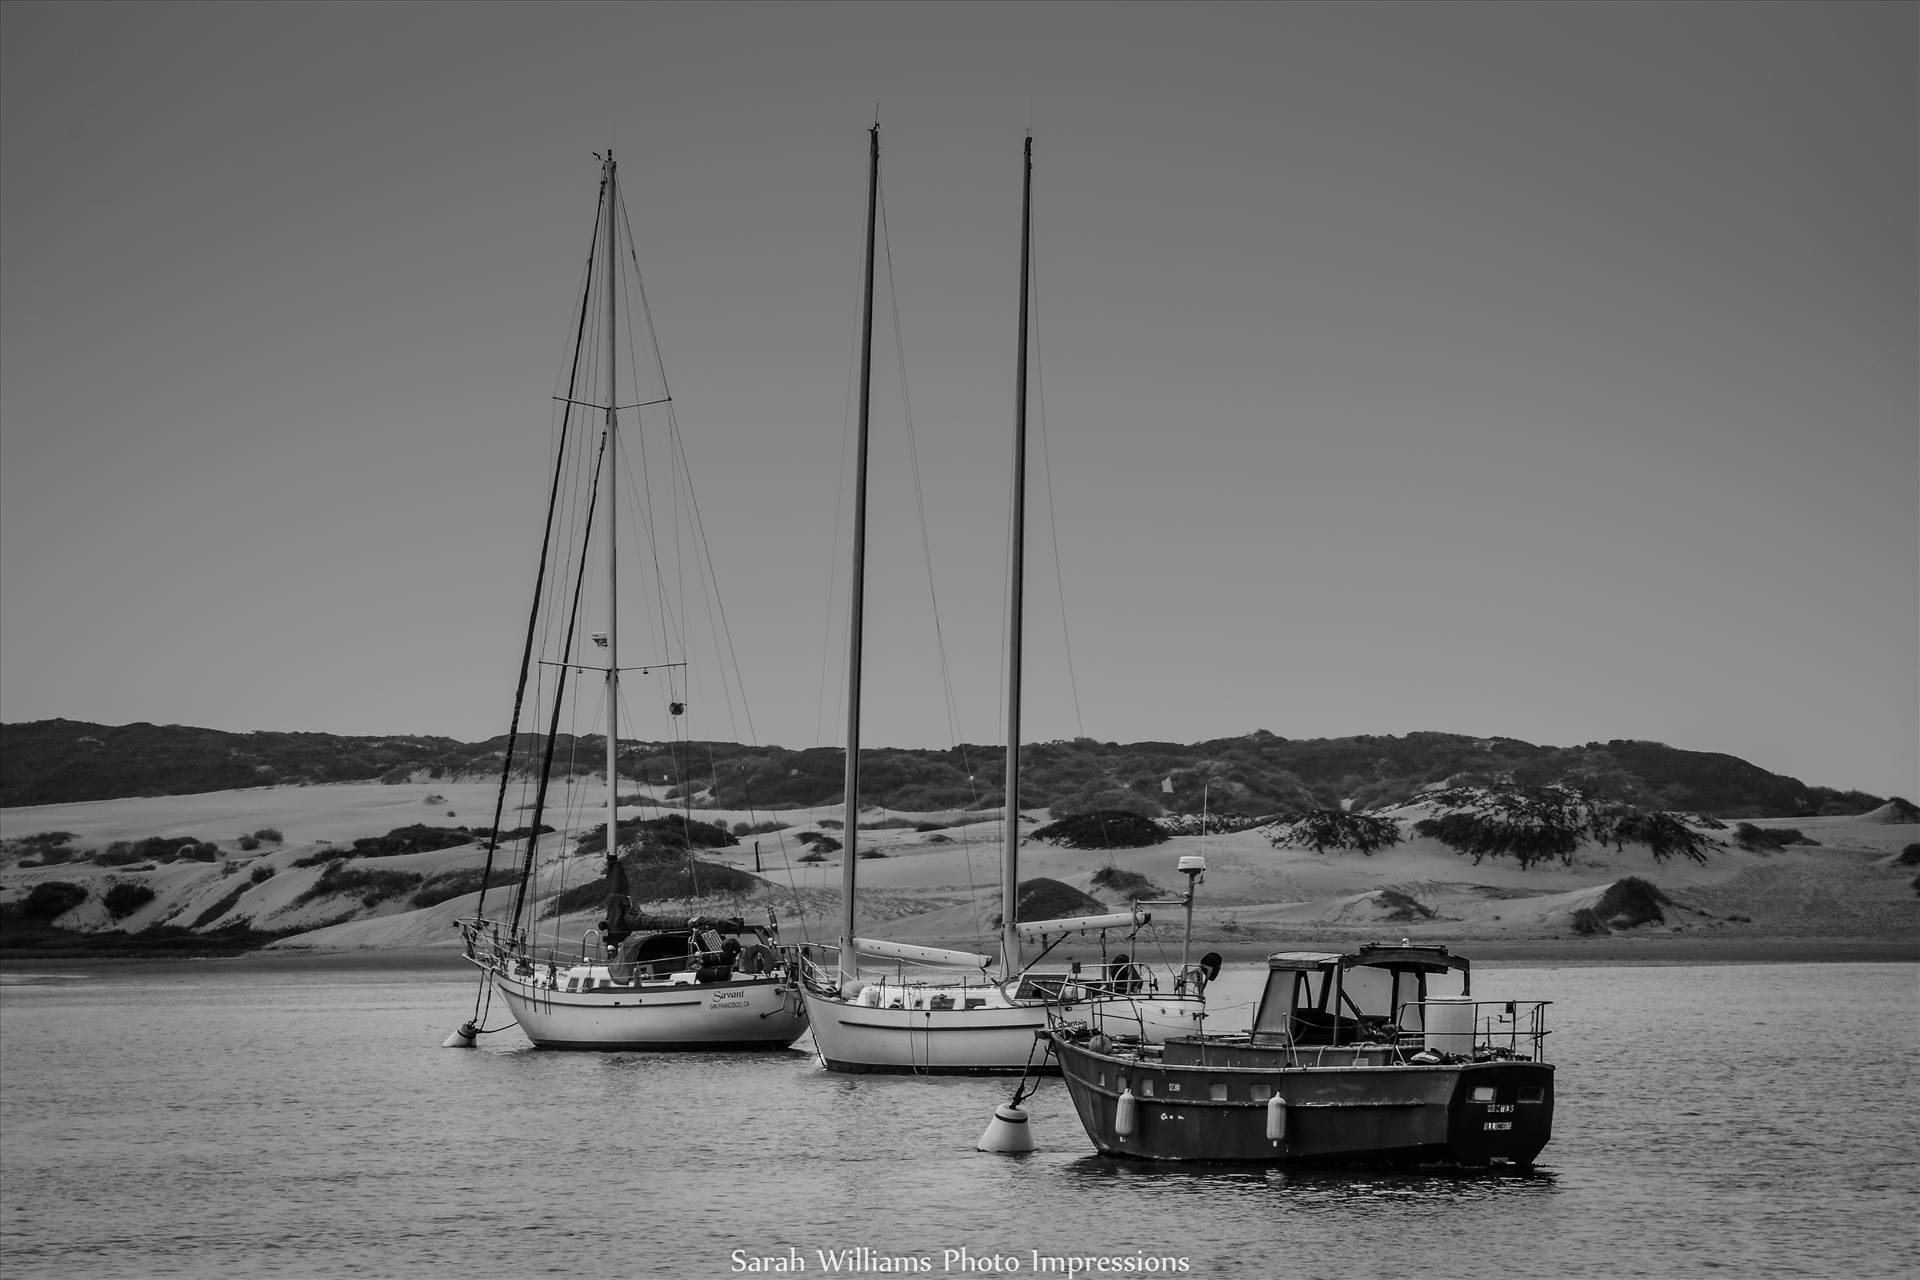 Boats in Morro Bay.jpg - undefined by Sarah Williams